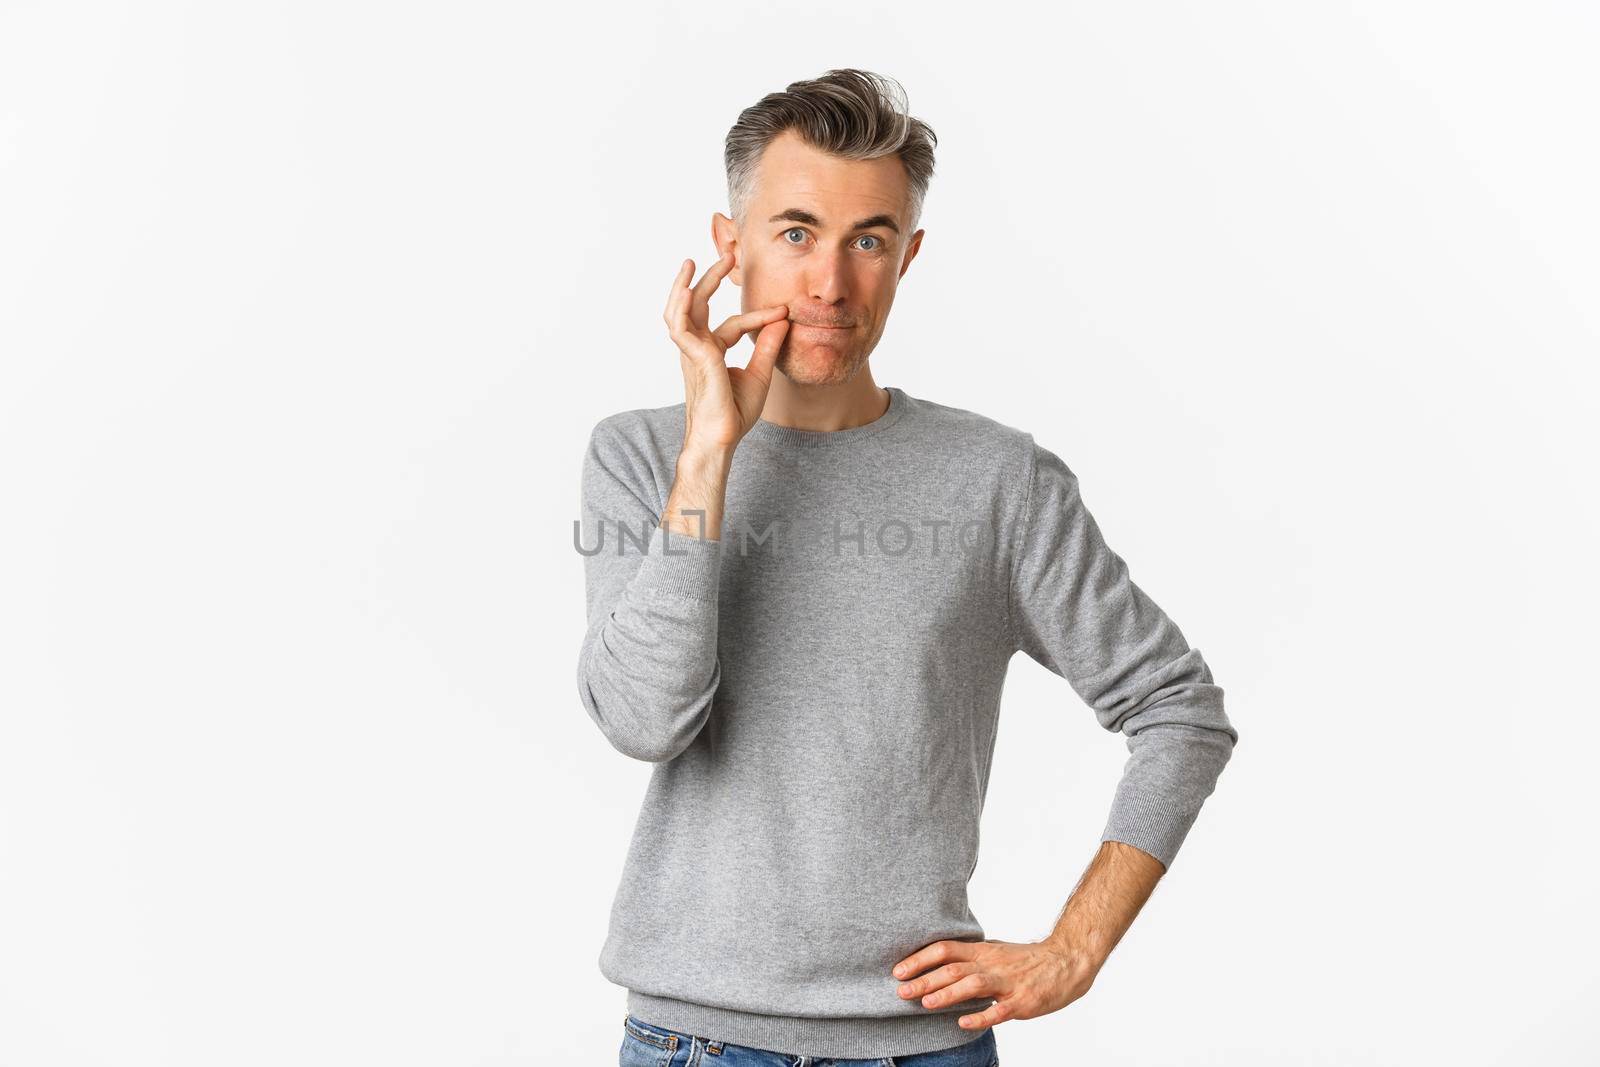 Portrait of middle-aged man making promise to keep mouth shut, zipping lips, hiding secret, standing over white background.